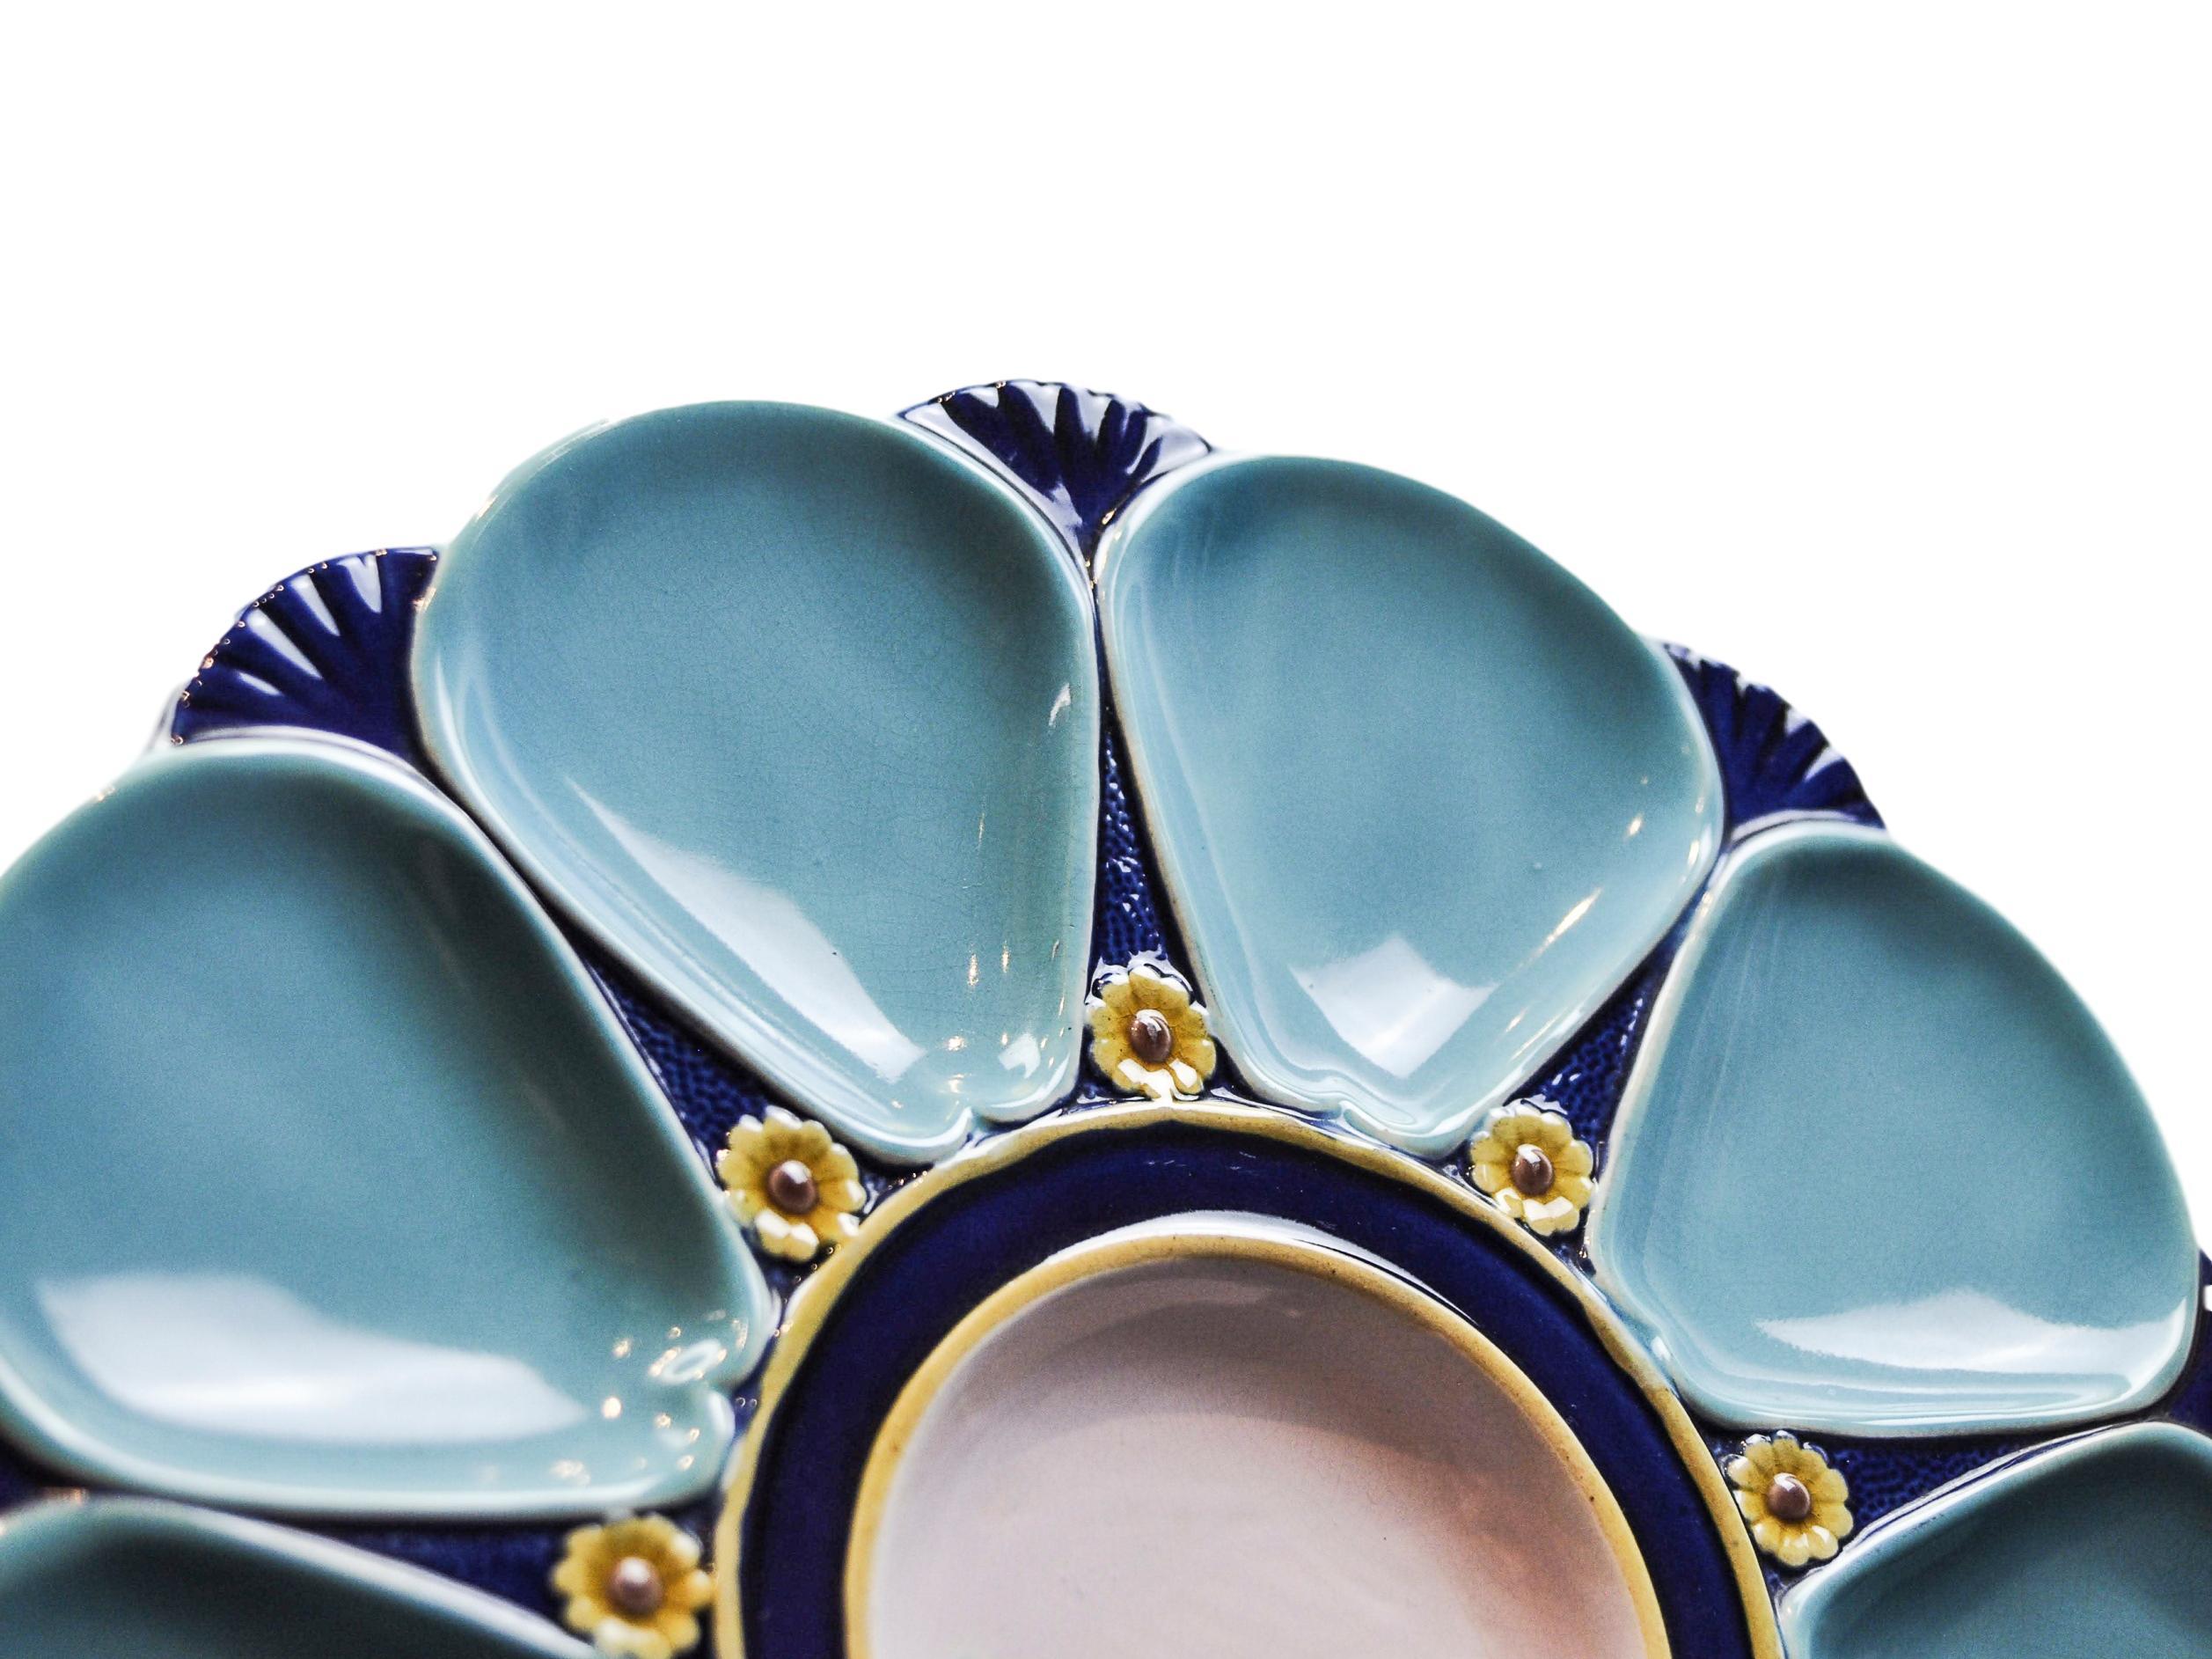 Late 19th Century Minton Majolica Oyster Plate